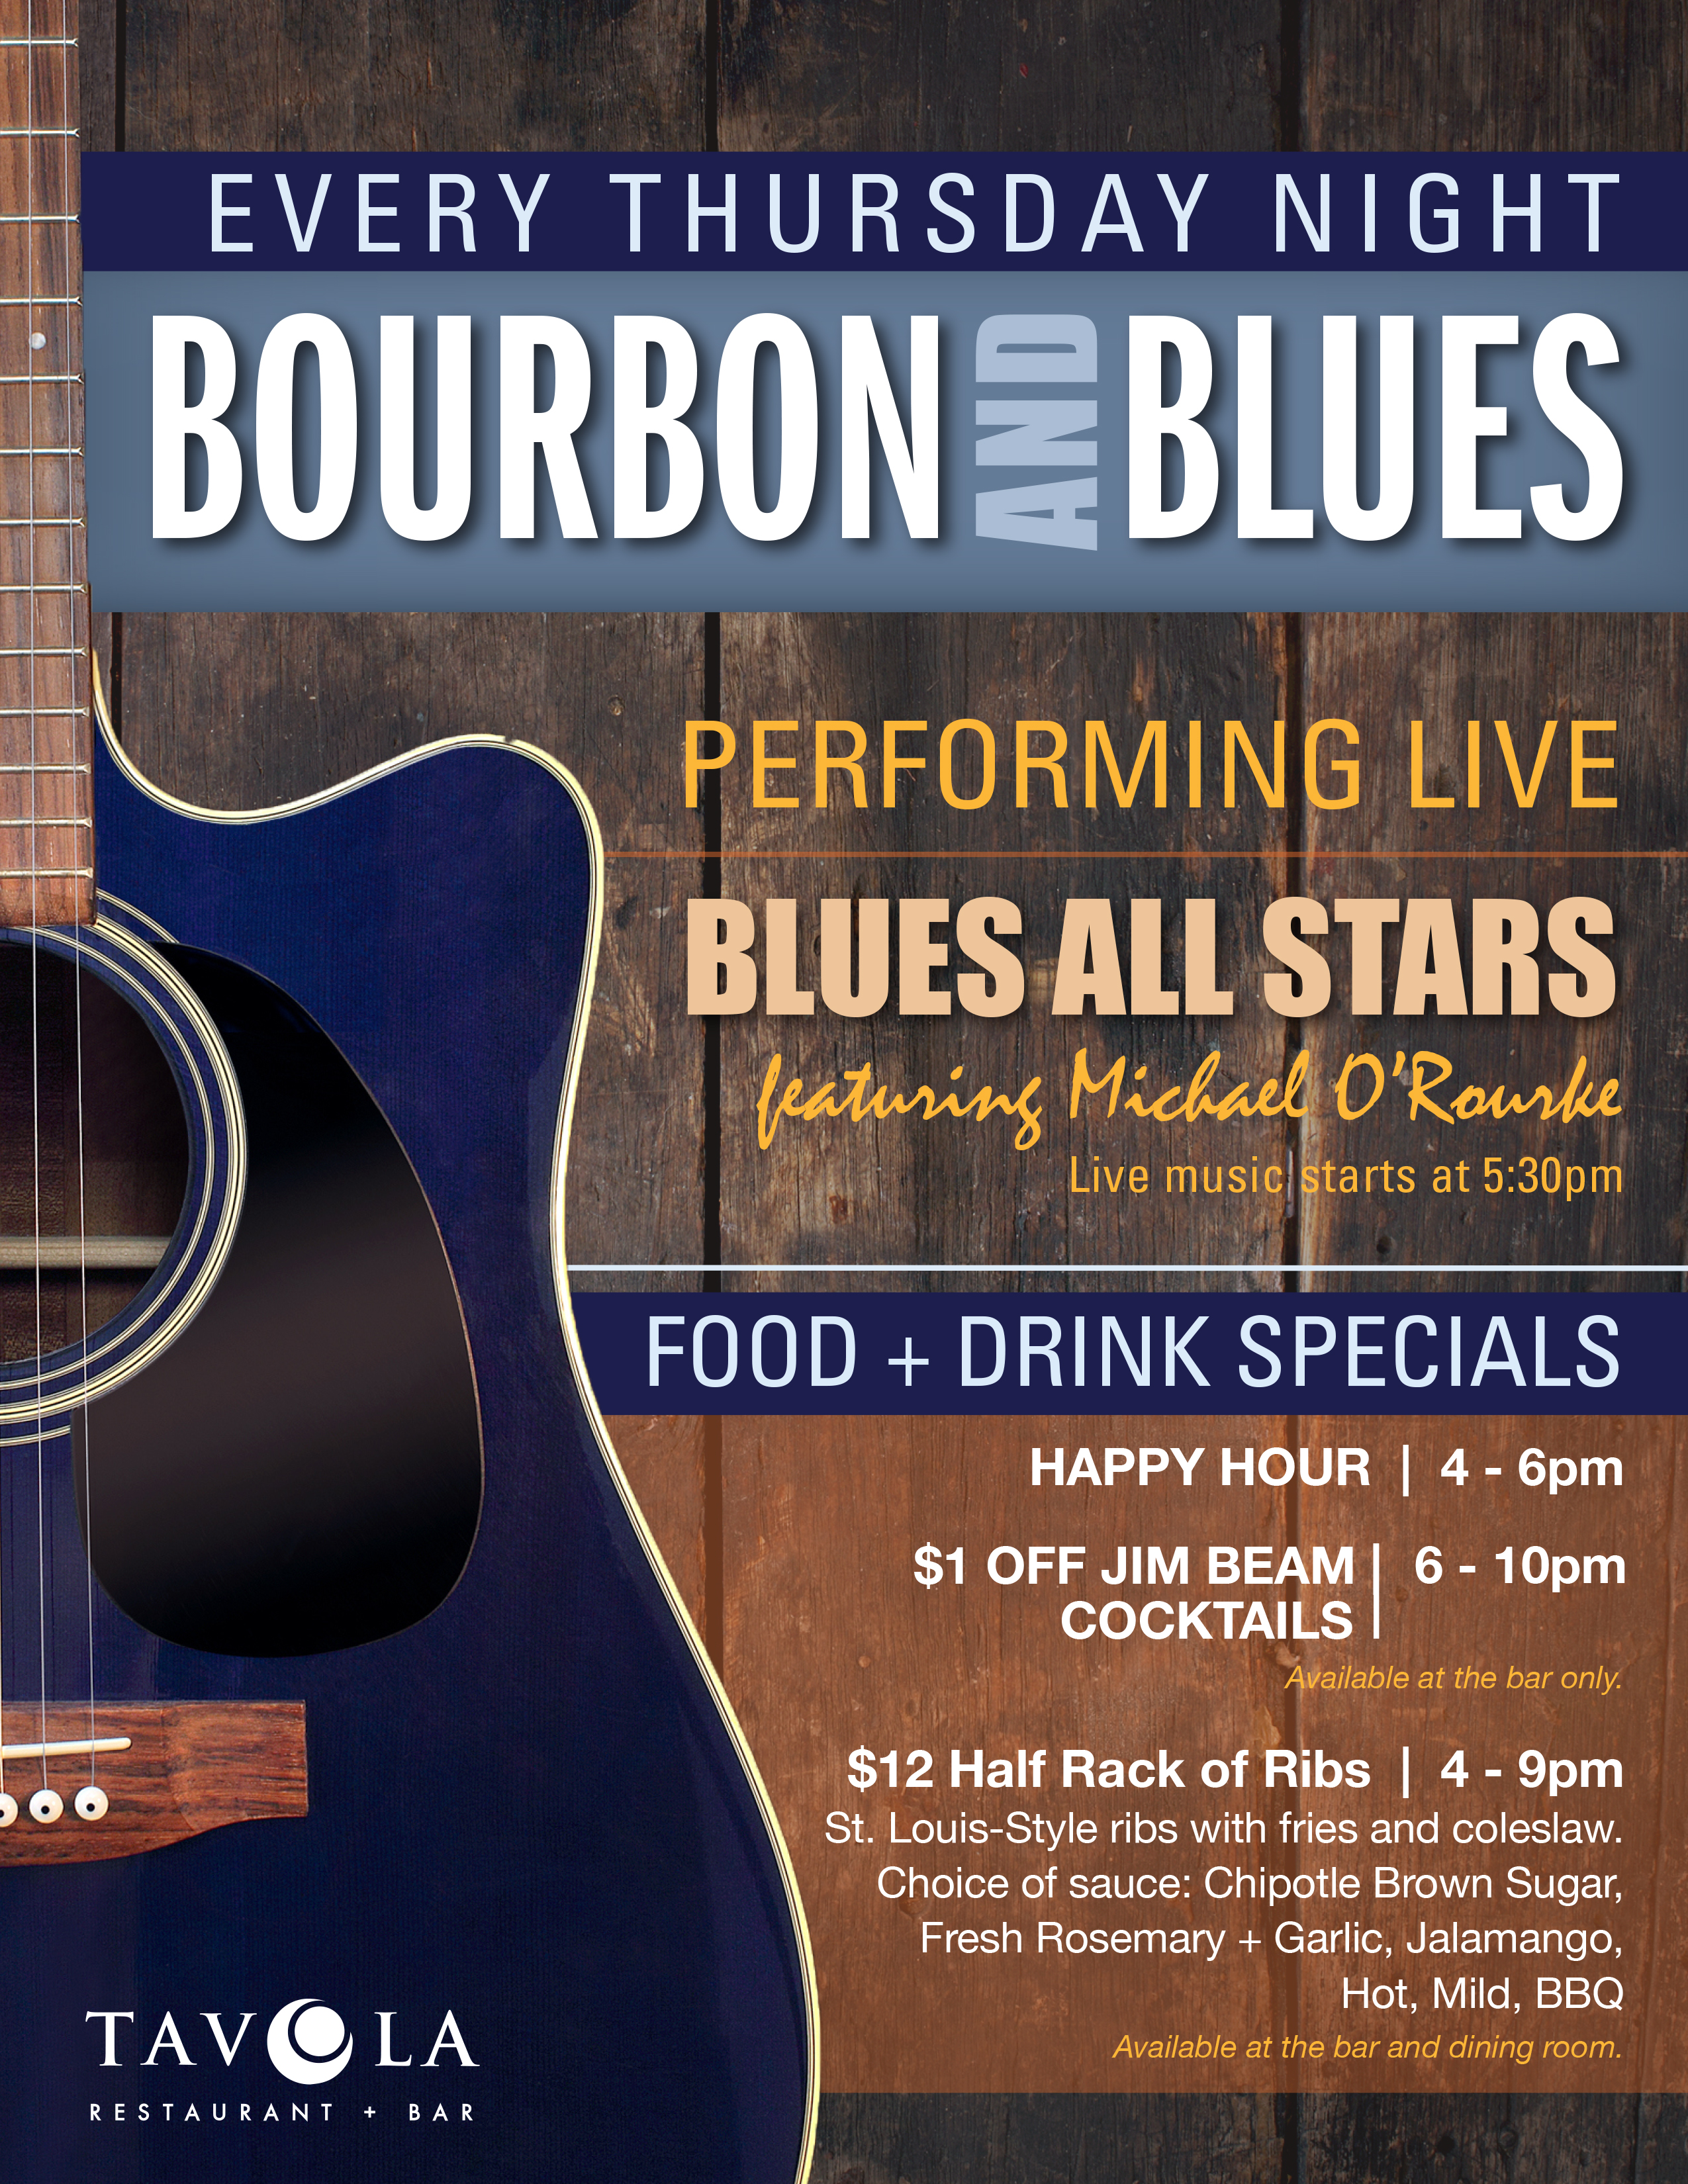 Bourbon and Blues specials and performers.